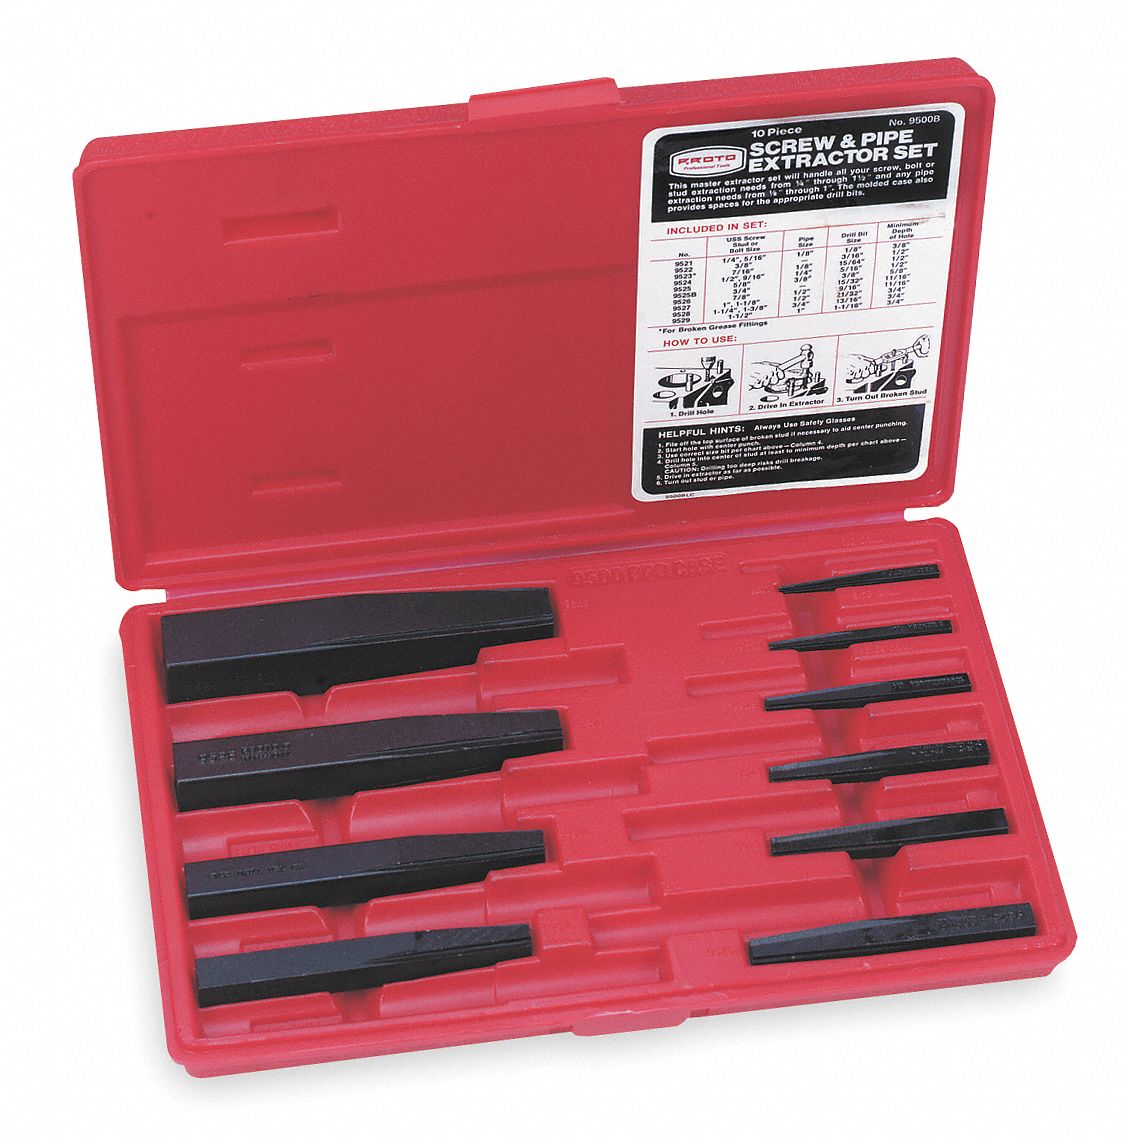 3 TO 25 MM BOLTS OB38 SCREW STUD EXTRACTOR BOLT REMOVER SET.INCLUDES DRILL BITS 